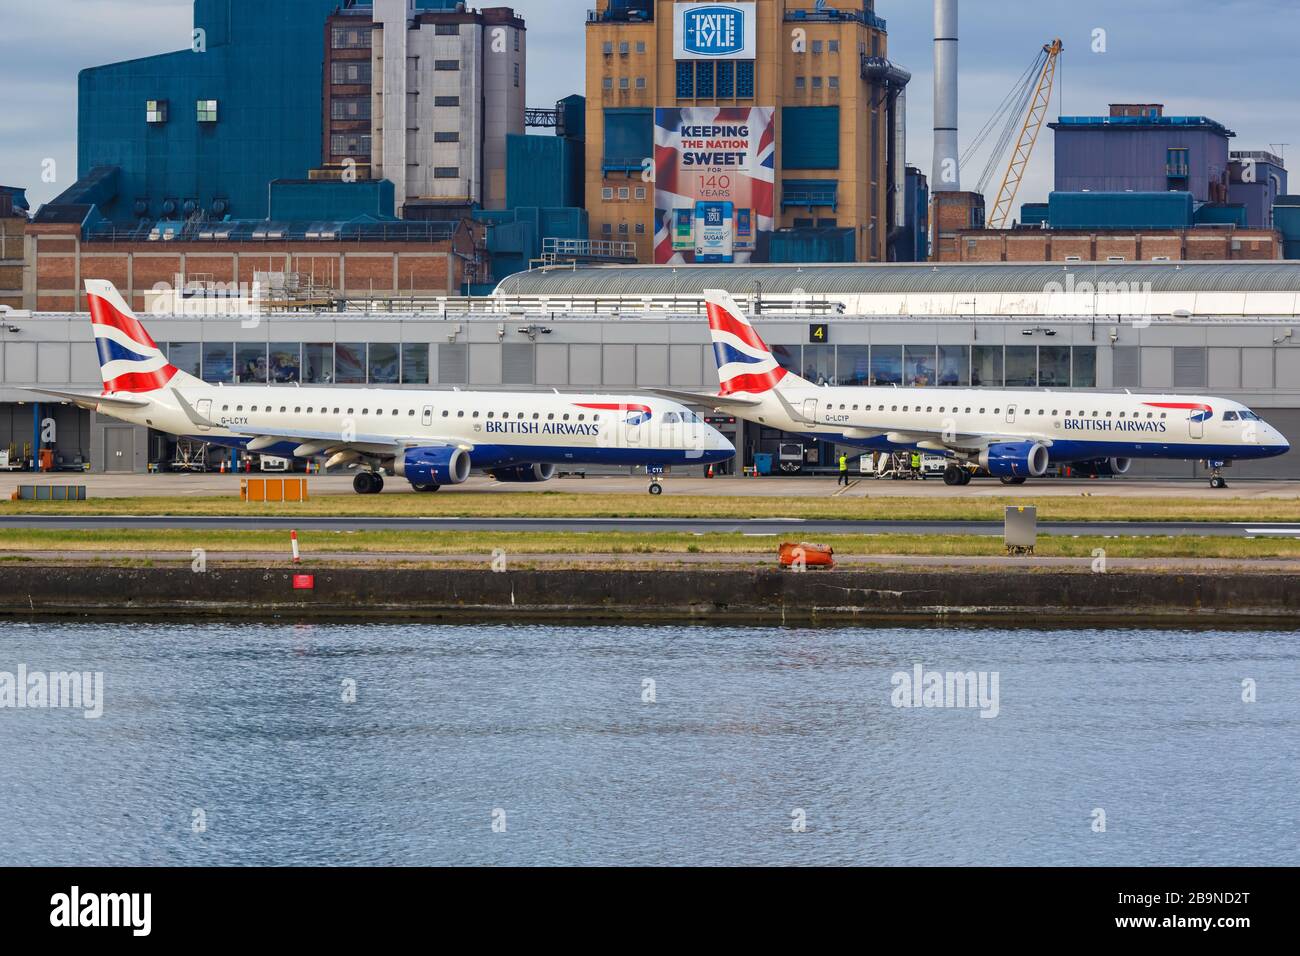 London, United Kingdom – July 8, 2019: British Airways BA CityFlyer Embraer 190 airplanes at London City airport (LCY) in the United Kingdom. Stock Photo